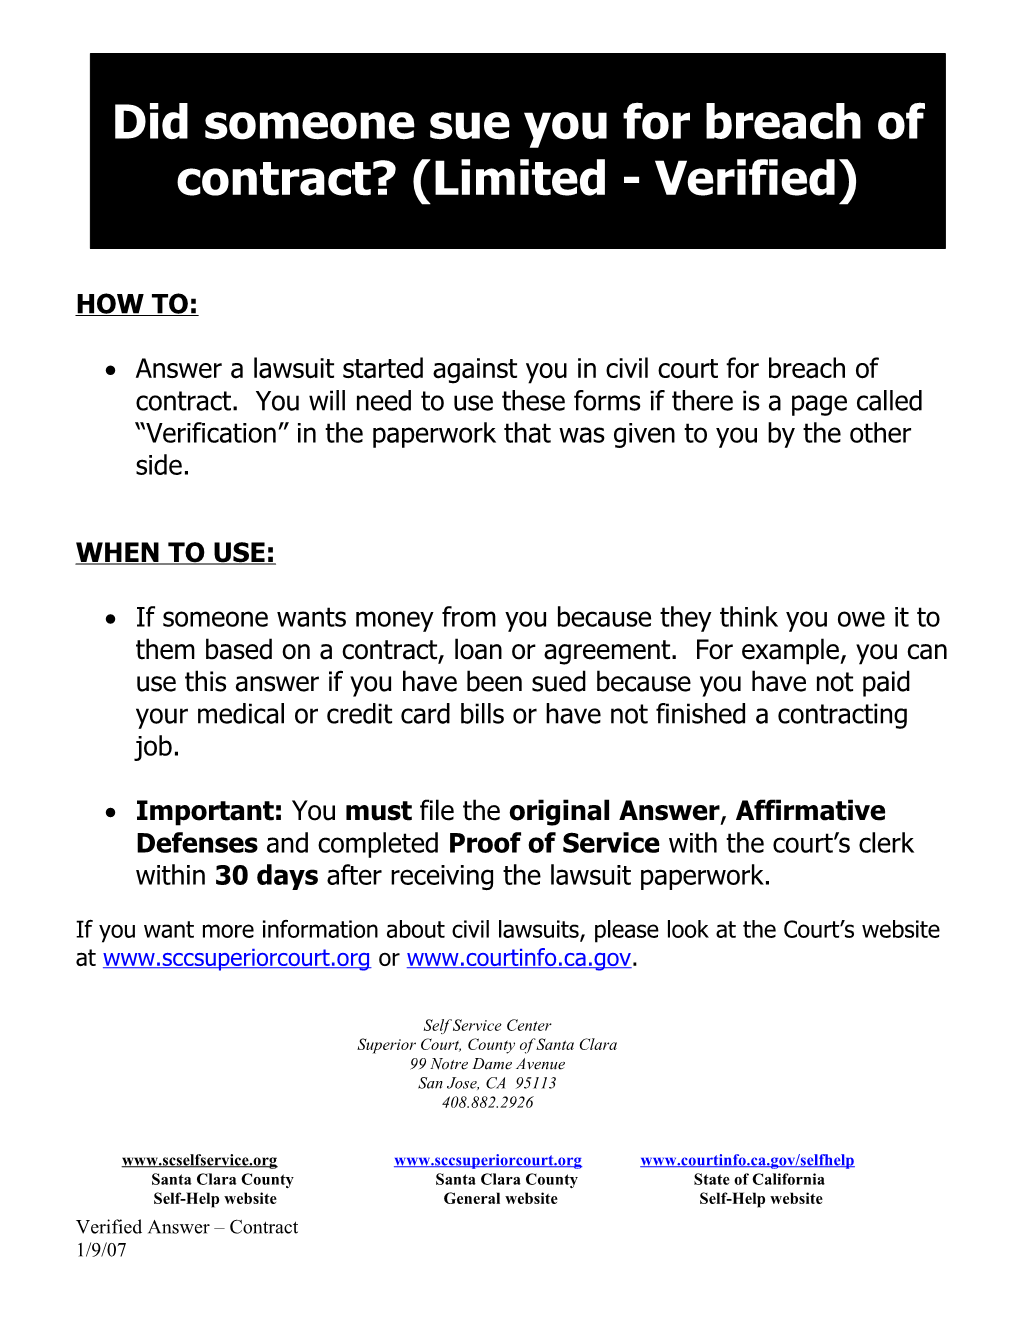 Answer a Lawsuit Started Against You in Civil Court for Breach of Contract. You Will Need